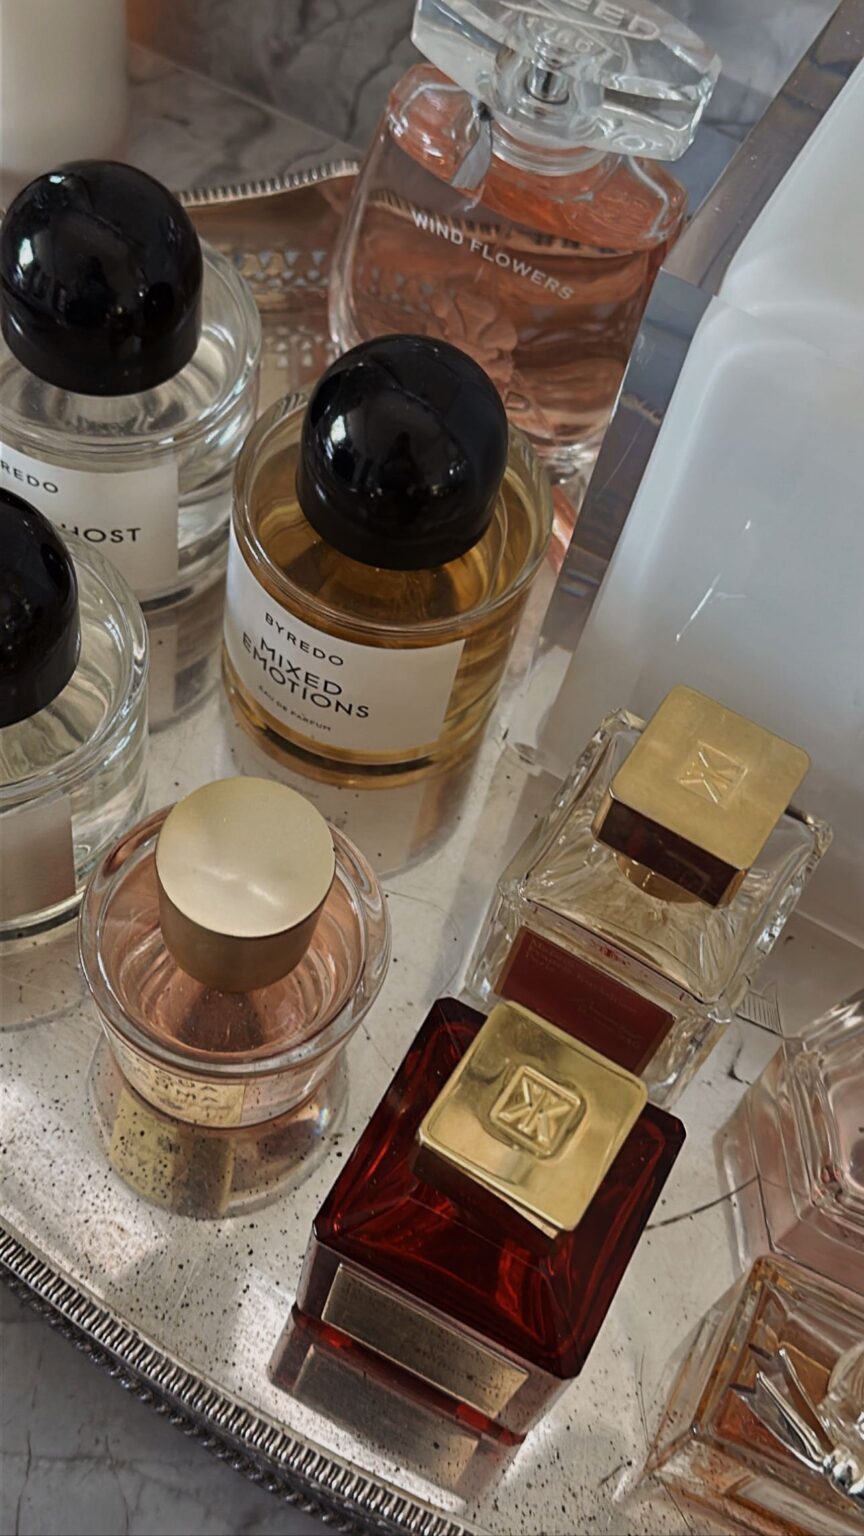 Perfumes In My Current Rotation - Arielle Lorre